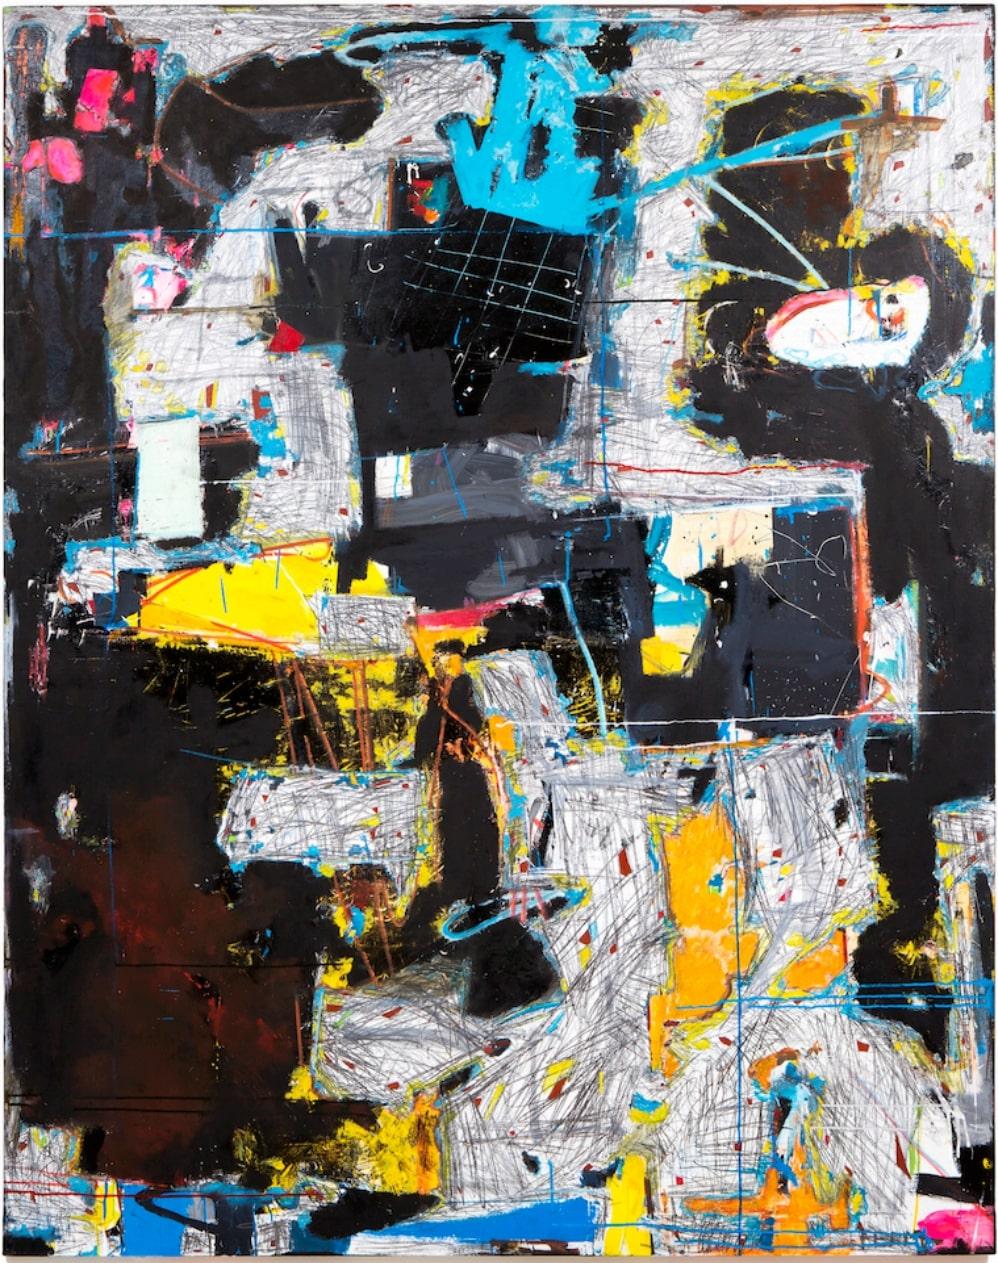 "The Bay State"

Abstract painting by Joseph Conrad Fern. Black background with an over layer of bright paint splashes in tones of yellow, blue, and pink.

See our shipping policies. For quotes, please contact us. 

All sales are final.

Born 1975,